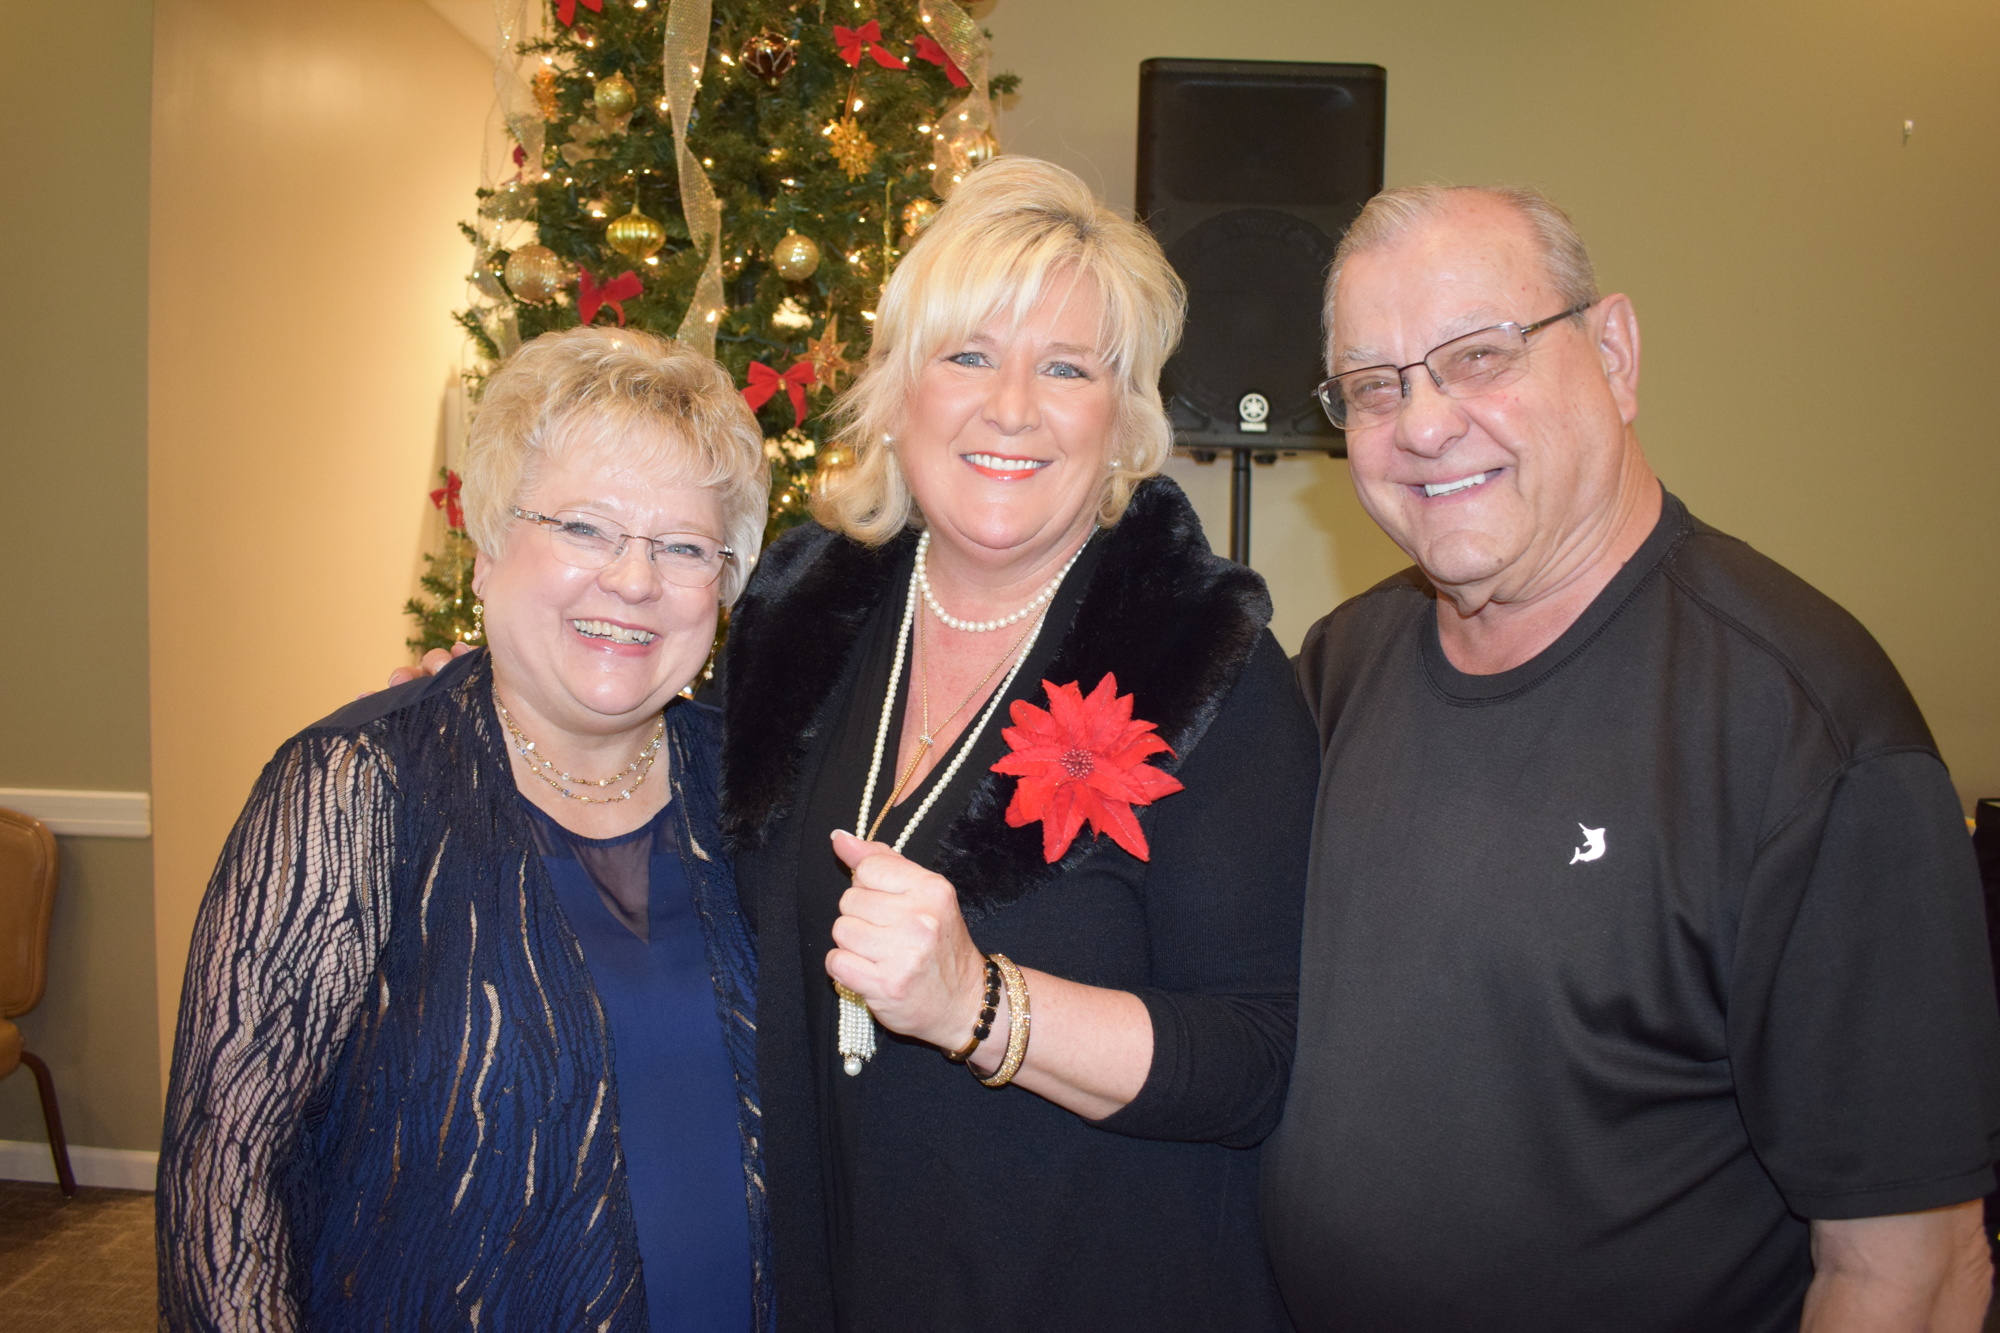 Phyllis and Chuck Stolteben of Lynn's Spins stand with Meals on Wheels PLUS President and CEO Maribeth Phillips (center). The Stoltebens donated their musical performance to the event.